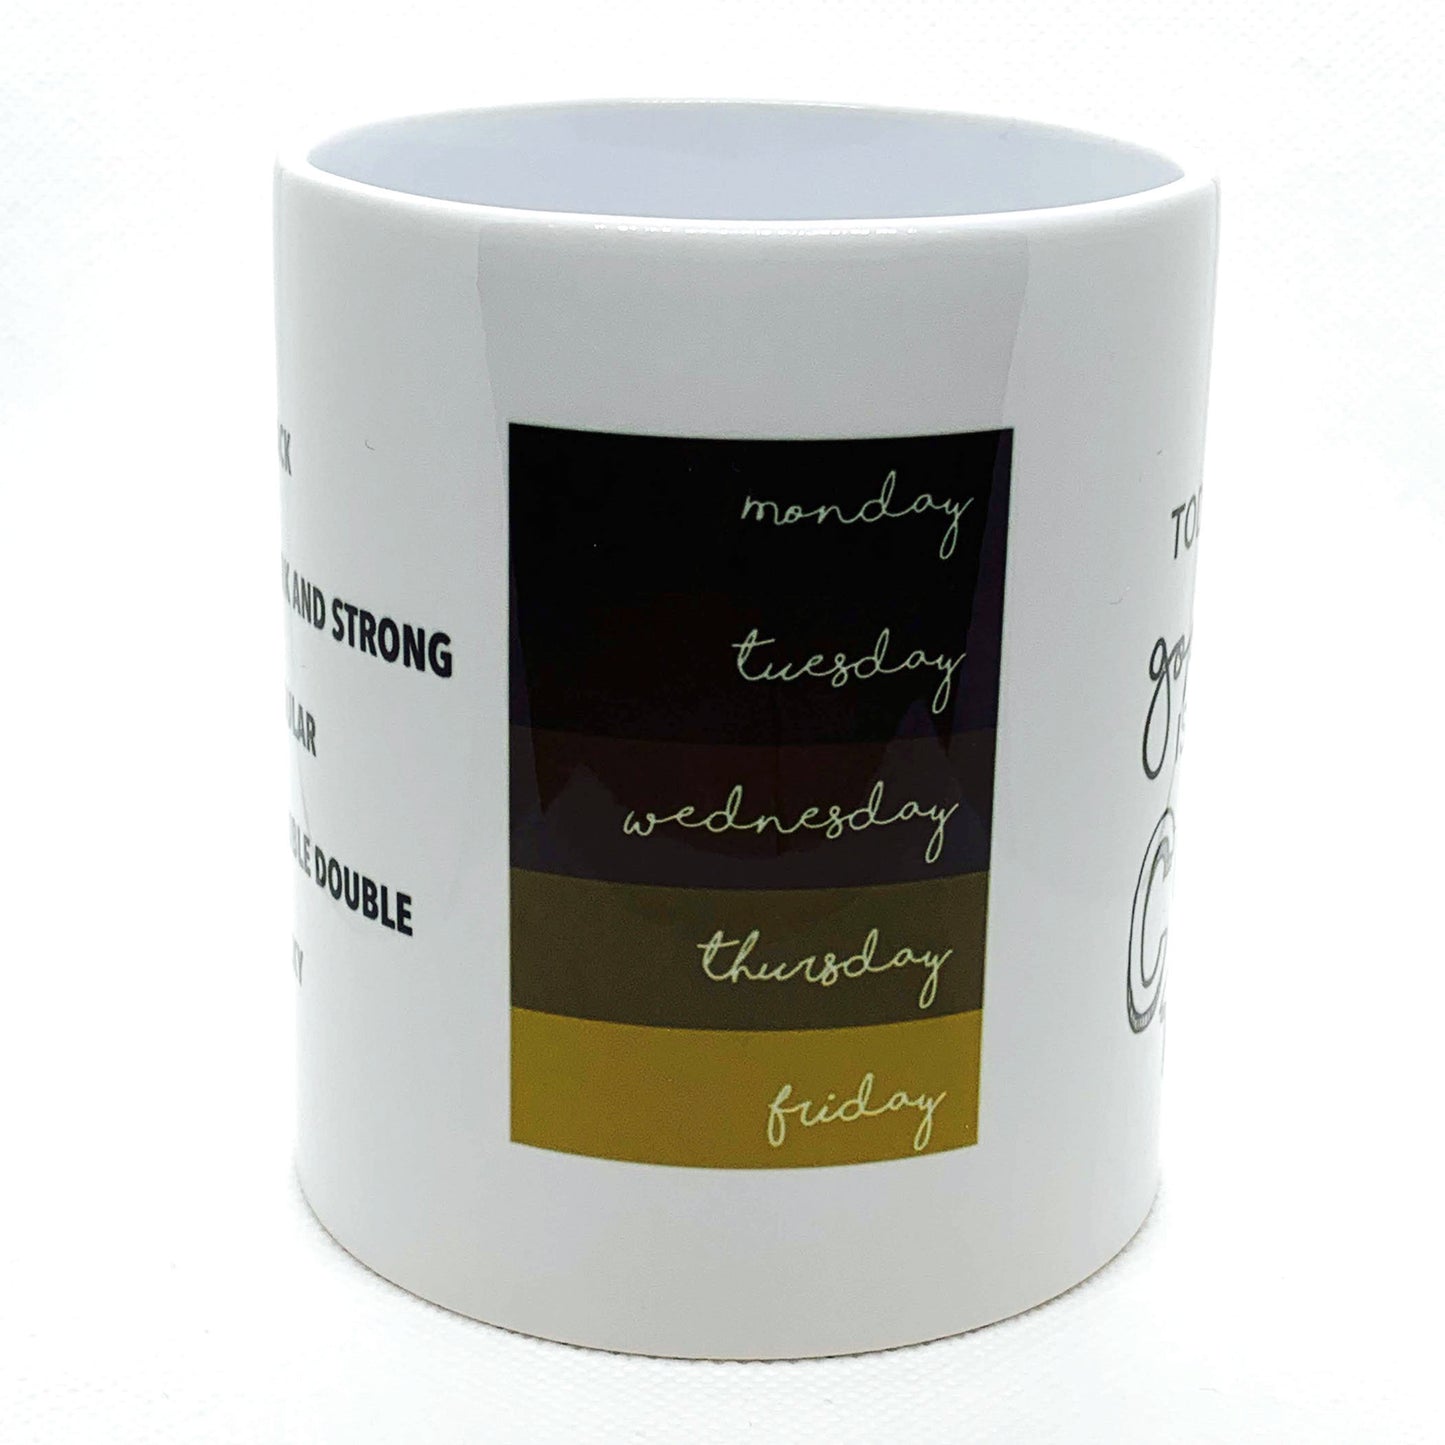 Custom Ceramic Mug for Librarian Thank You Gift, Personalized Gift for Book Nerd, Literary Gift Ideas - Busybee Creates